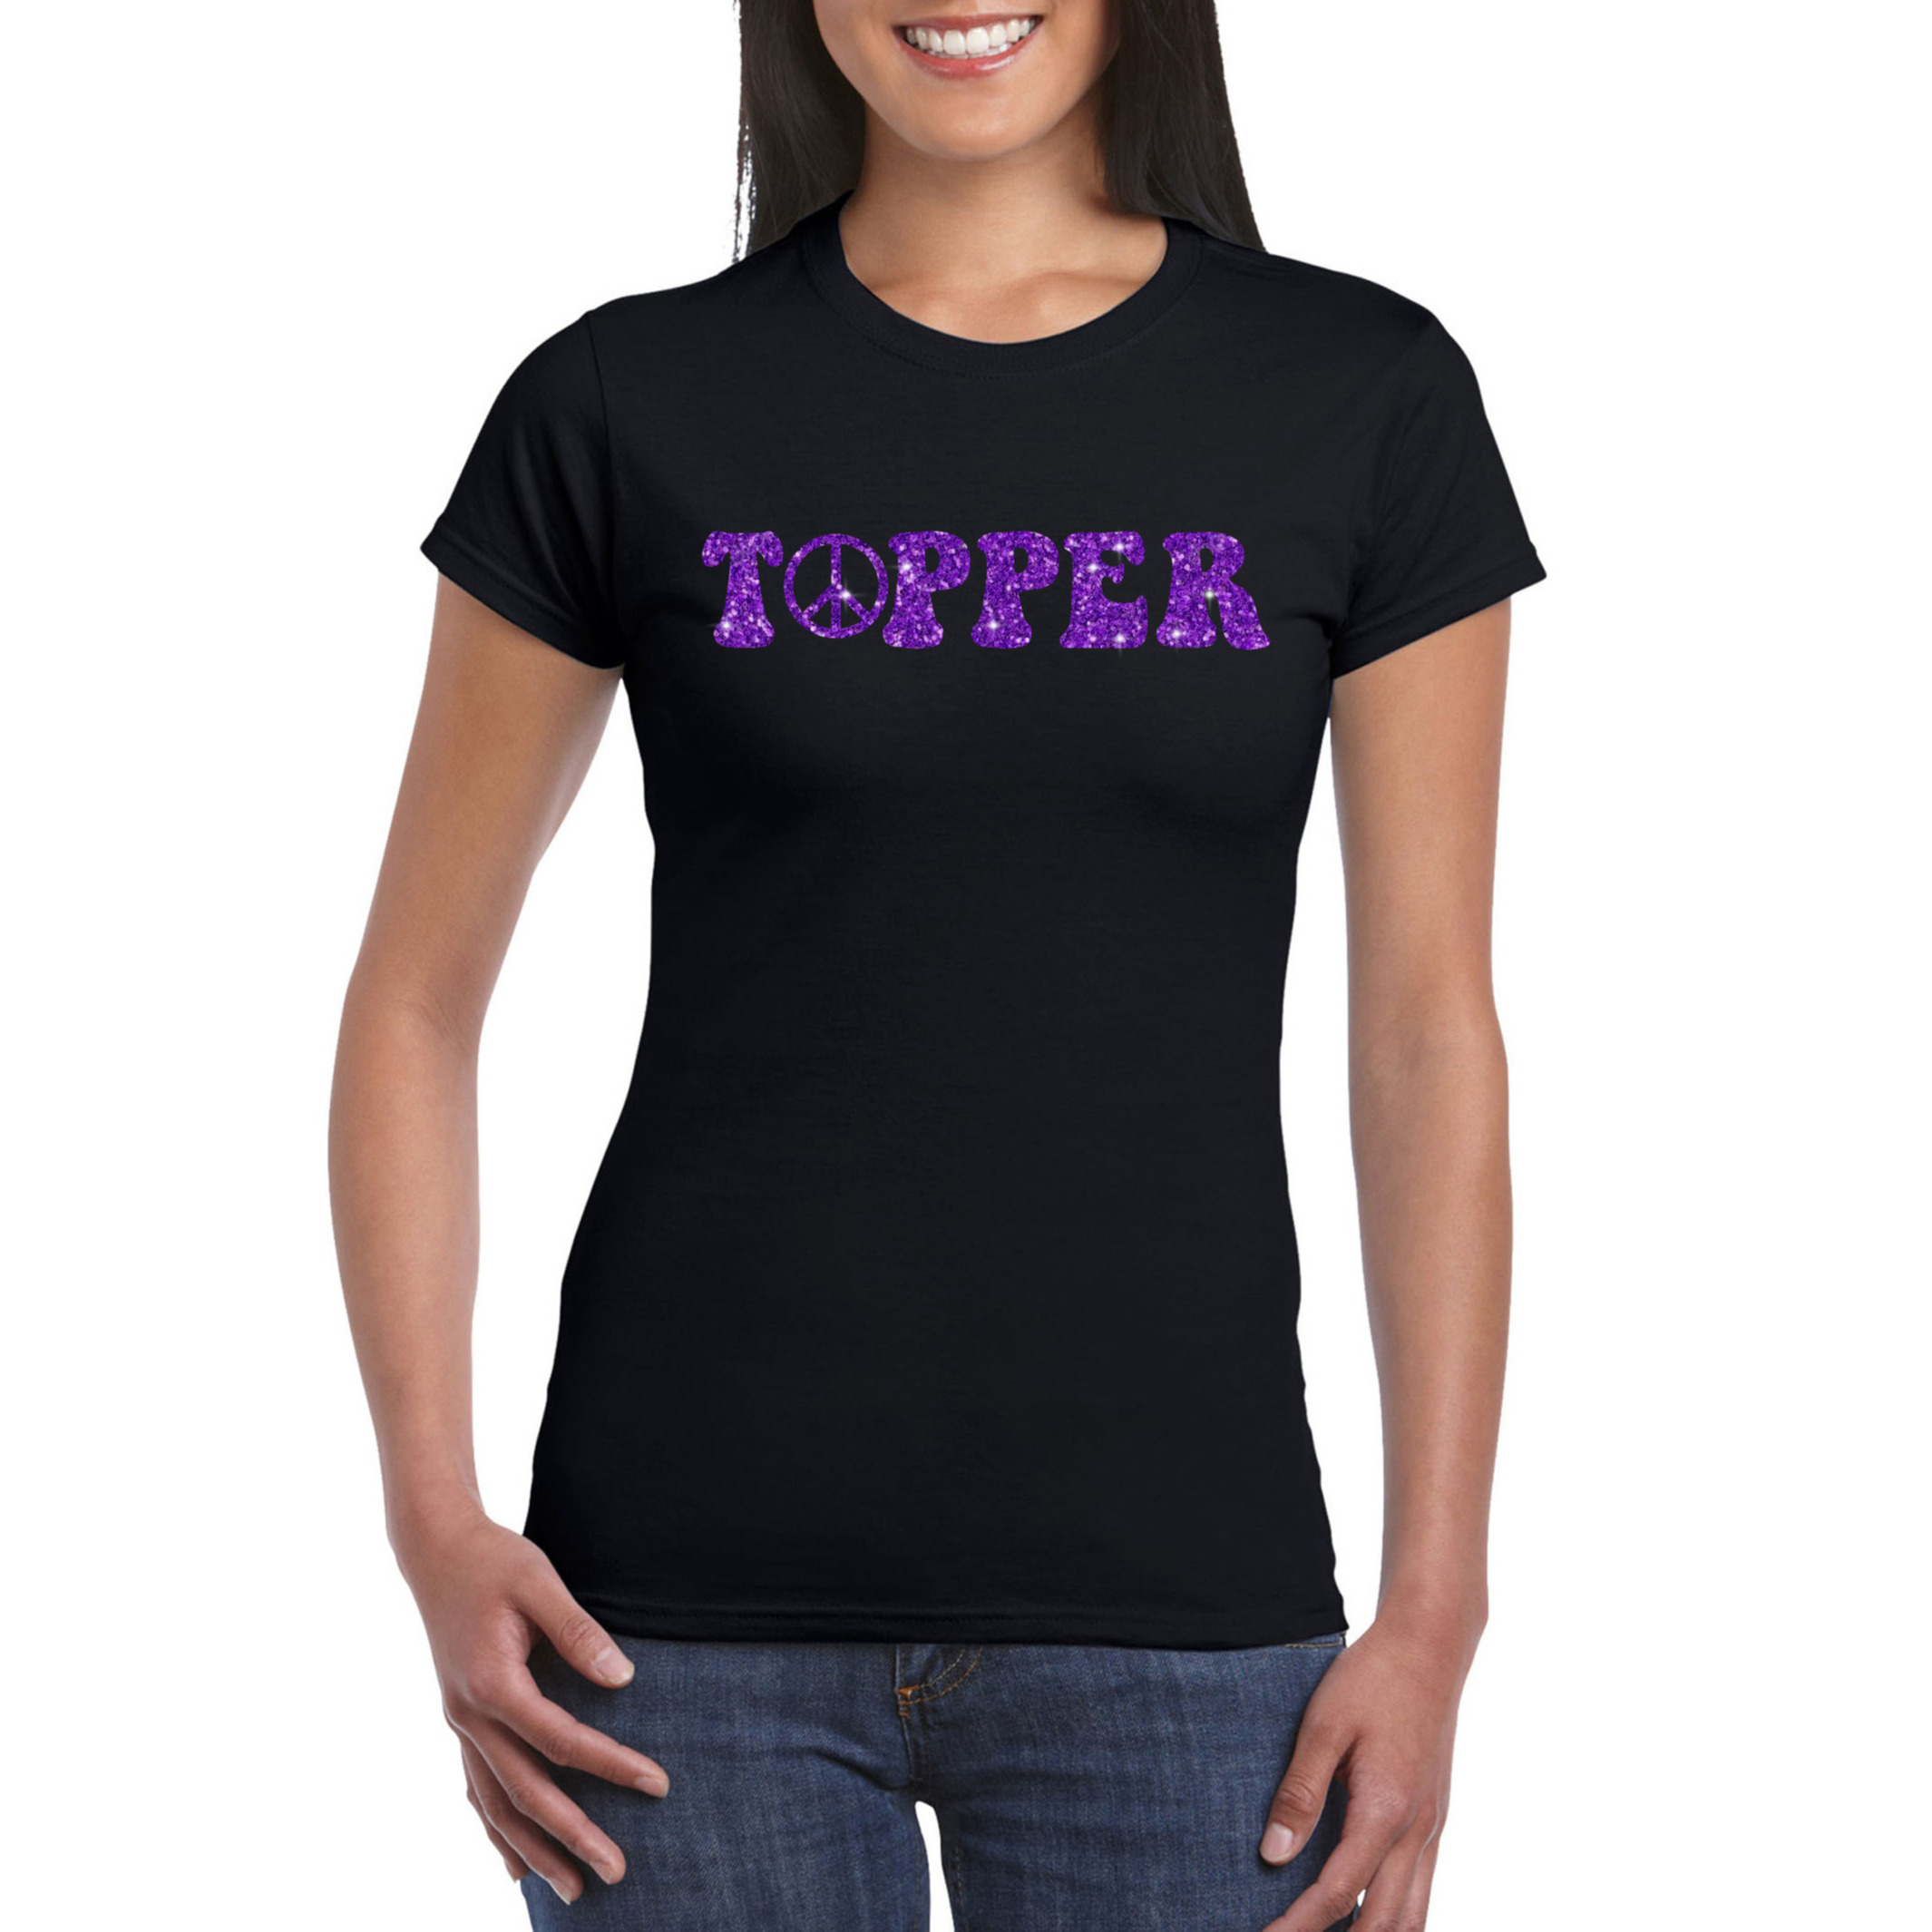 Toppers Zwart Flower Power t-shirt Topper met paarse letters dames